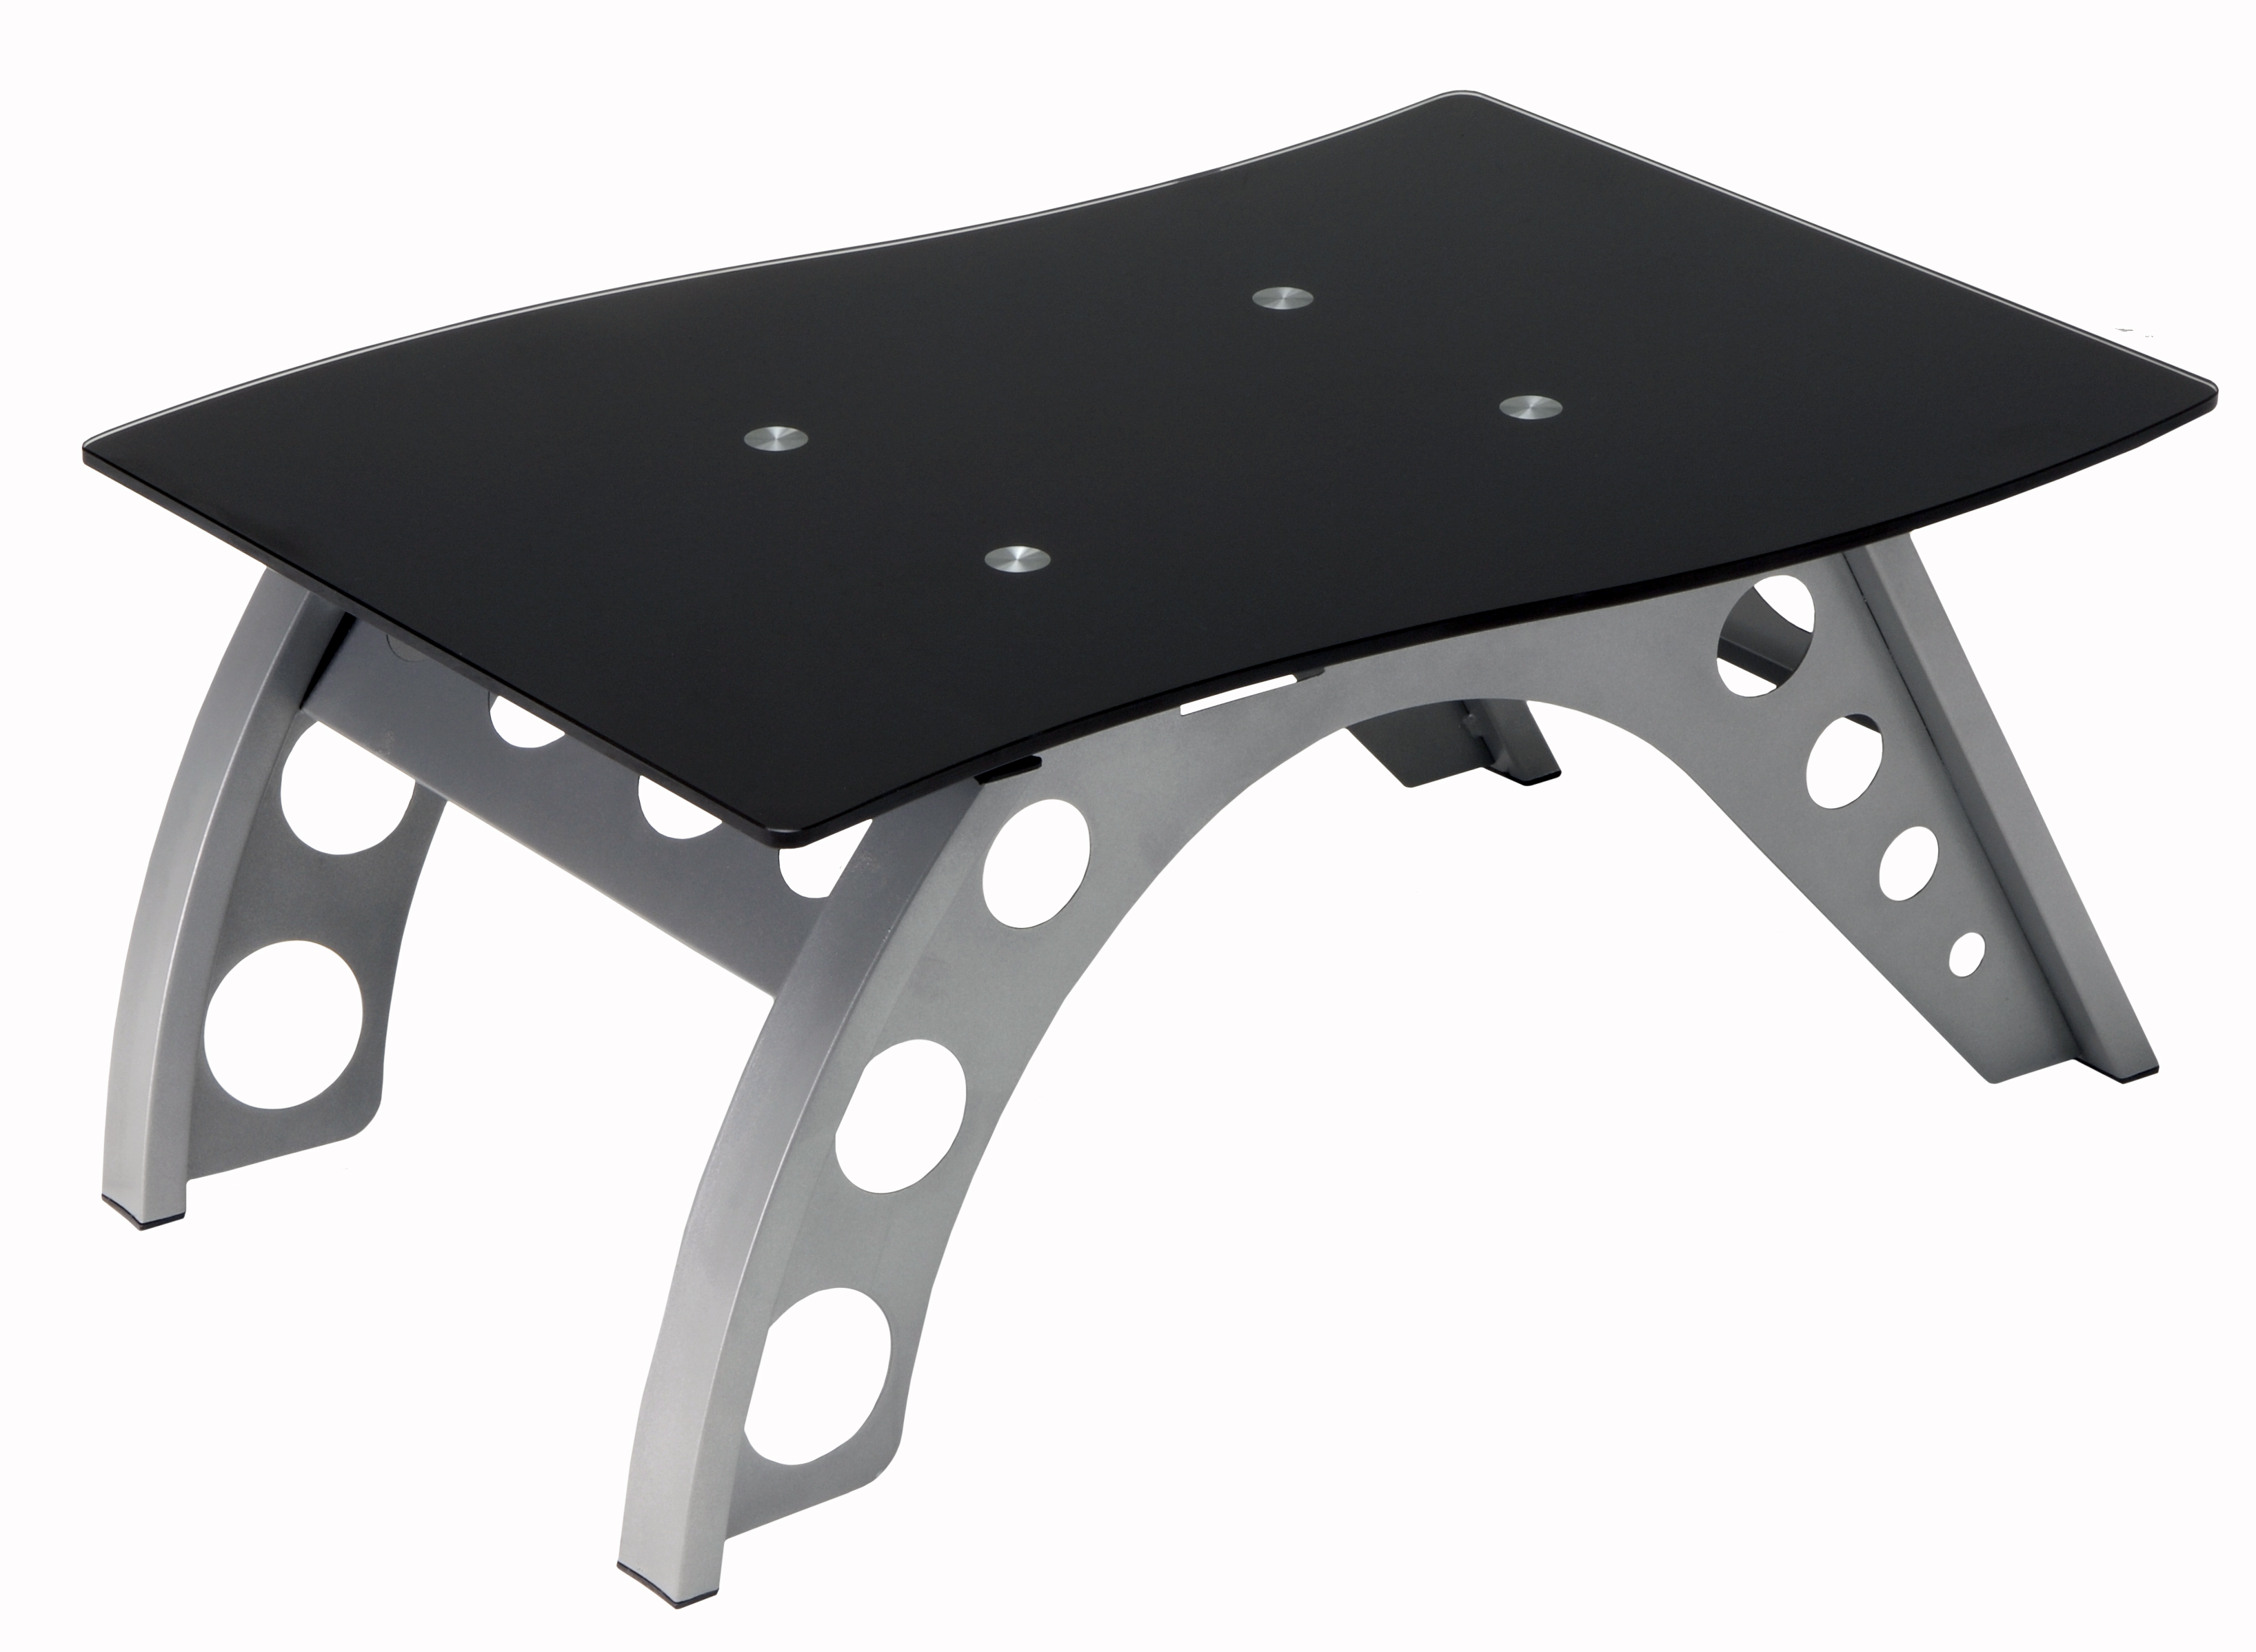 Intro-Tech Automotive, Pitstop Furniture, ST9000B Side Table Black, Side Table